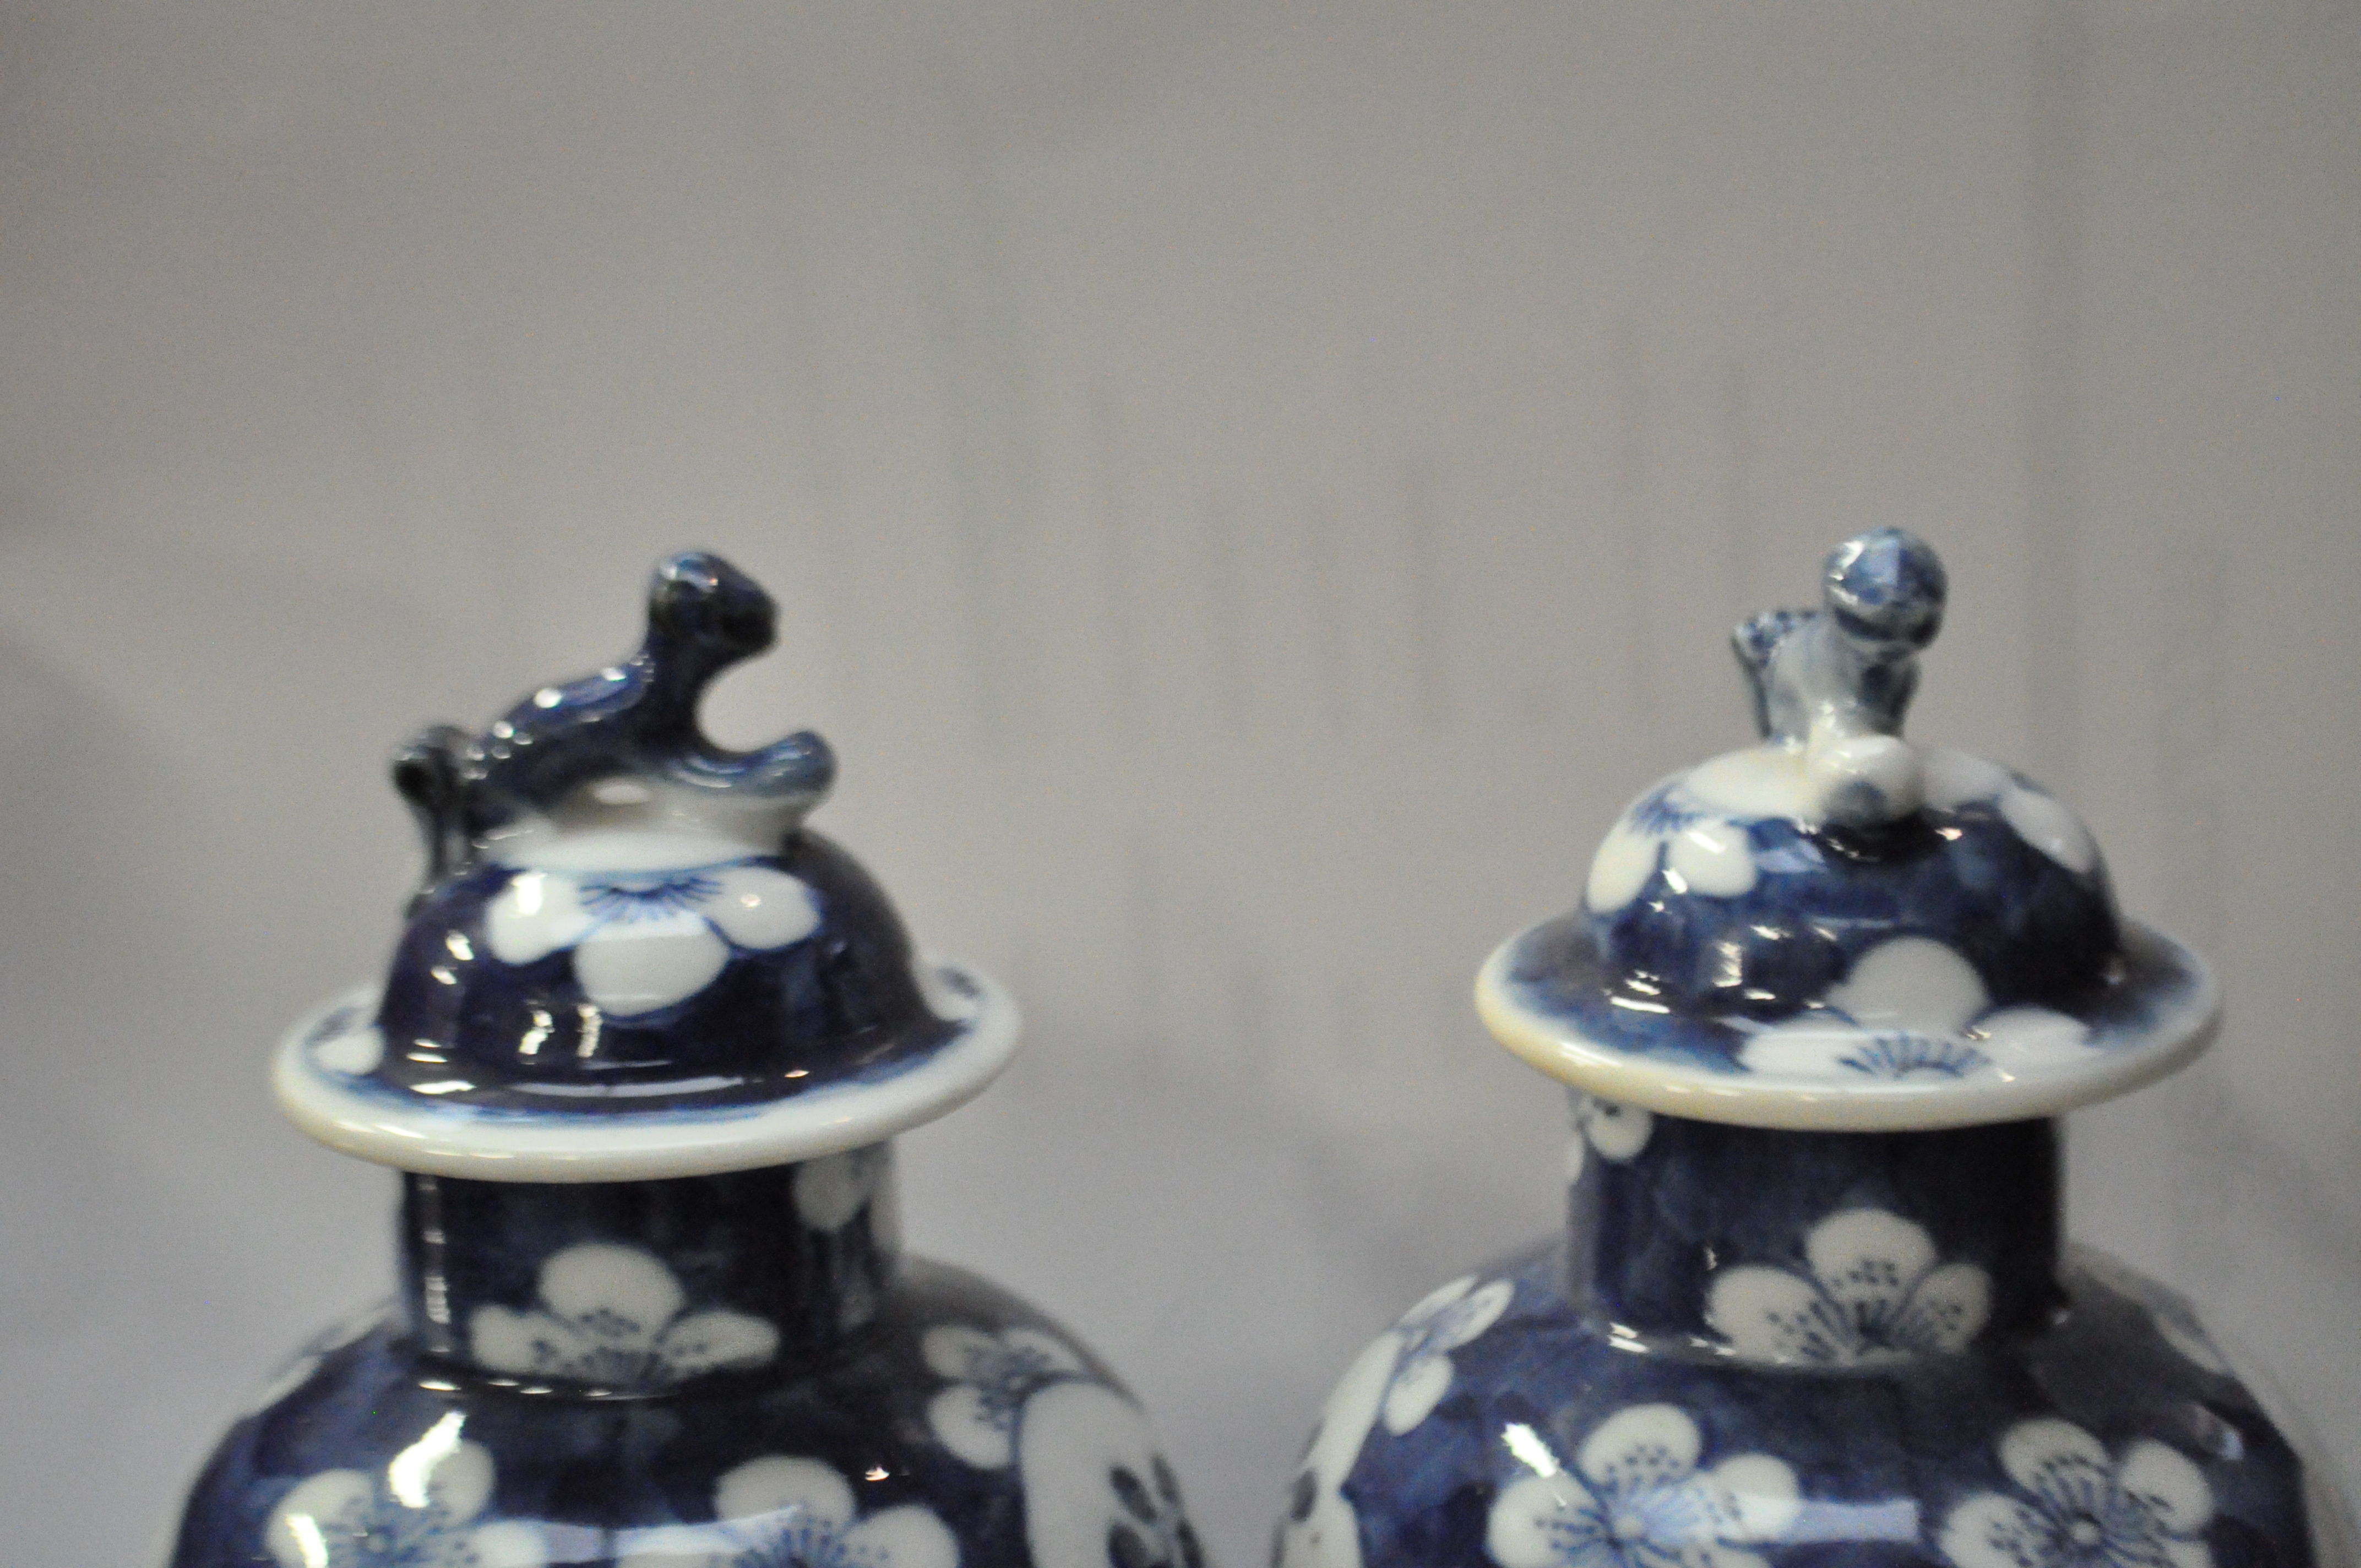 A Wedgwood 'Chinese Tigers' plate along with Royal Albert and Chinese lidded vases - Image 4 of 5